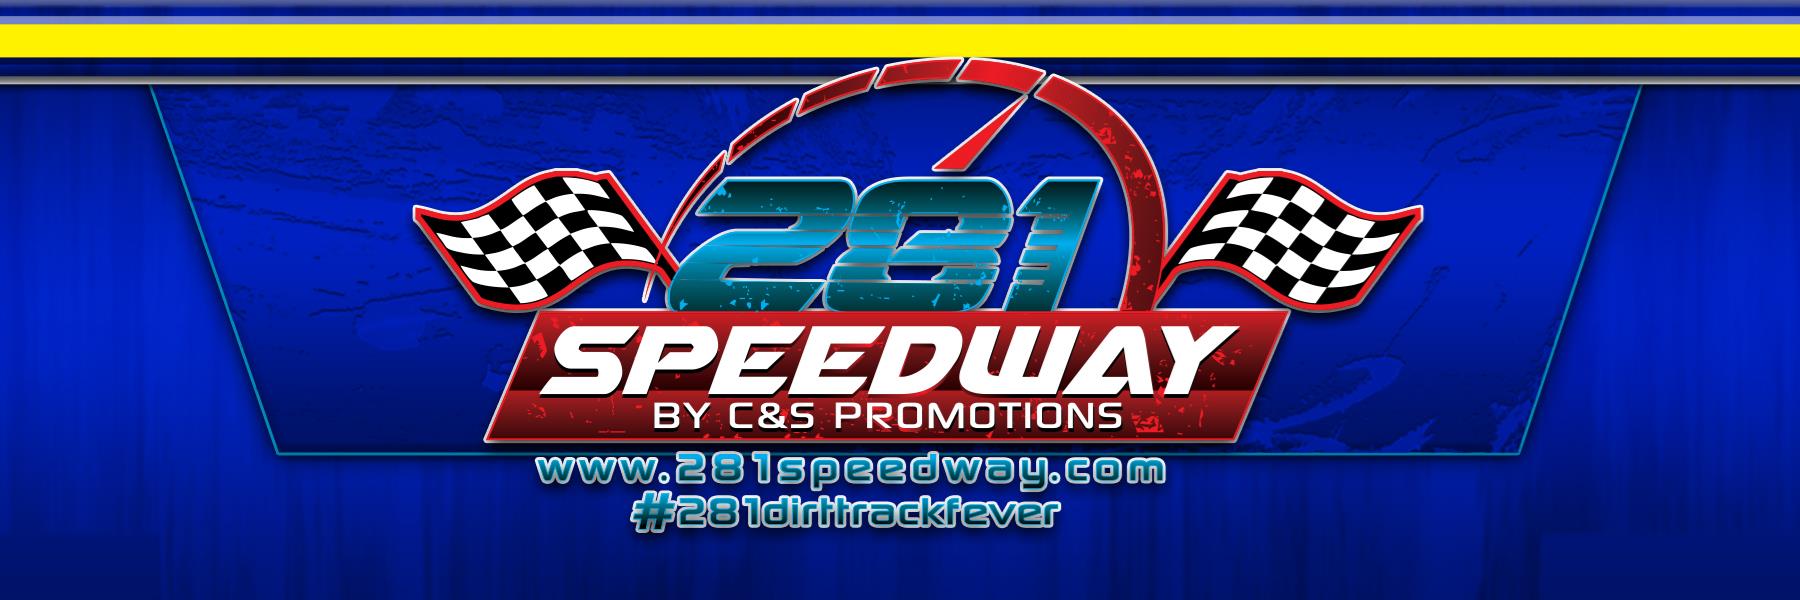 6/22/2019 - 281 Speedway by C&S Promotions